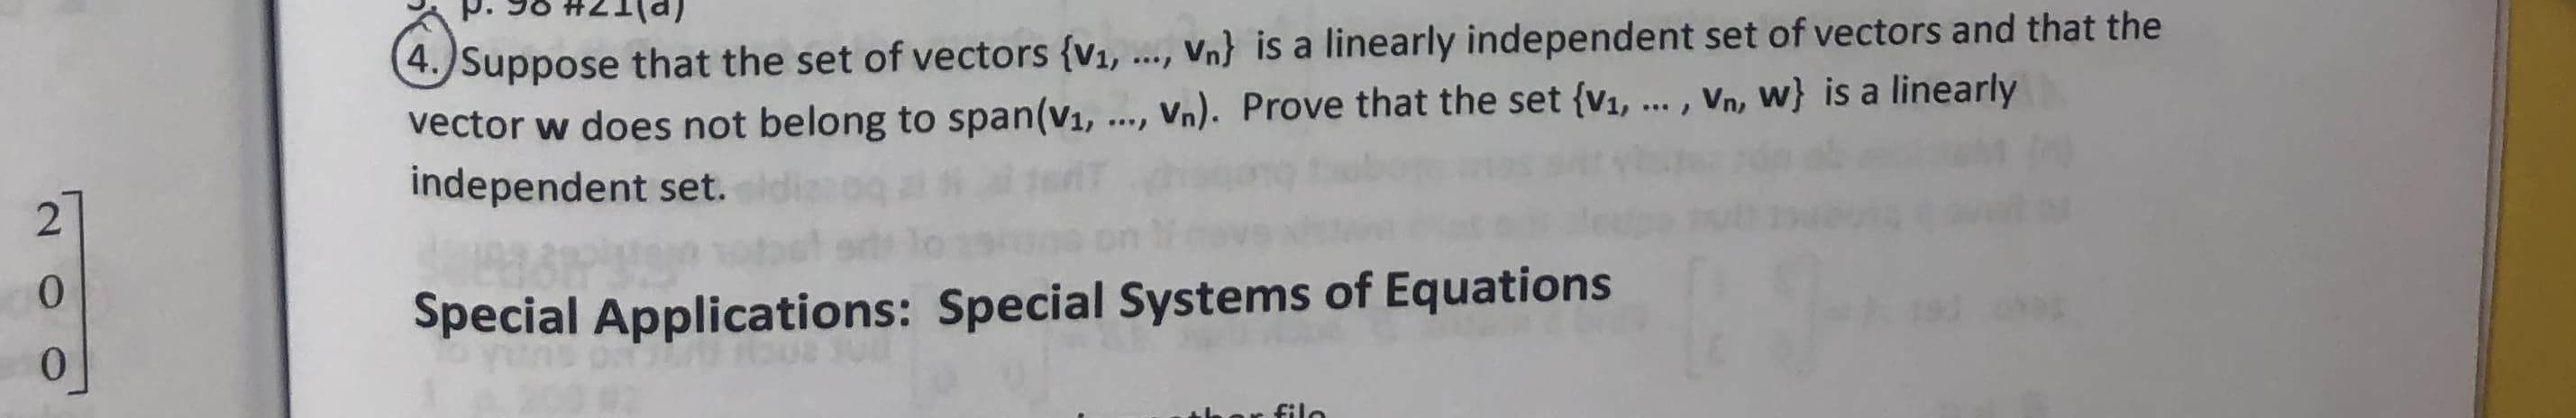 P.90 #27a
4.Suppose that the set of vectors {V1,
vector w does not belong to span(V1,
independent set.
Vn) is a linearly independent set of vectors and that the
Vn). Prove that the set {v1,... , Vn, w} is a linearly
2
0
Special Applications: Special Systems of Equations
nD oa ::
